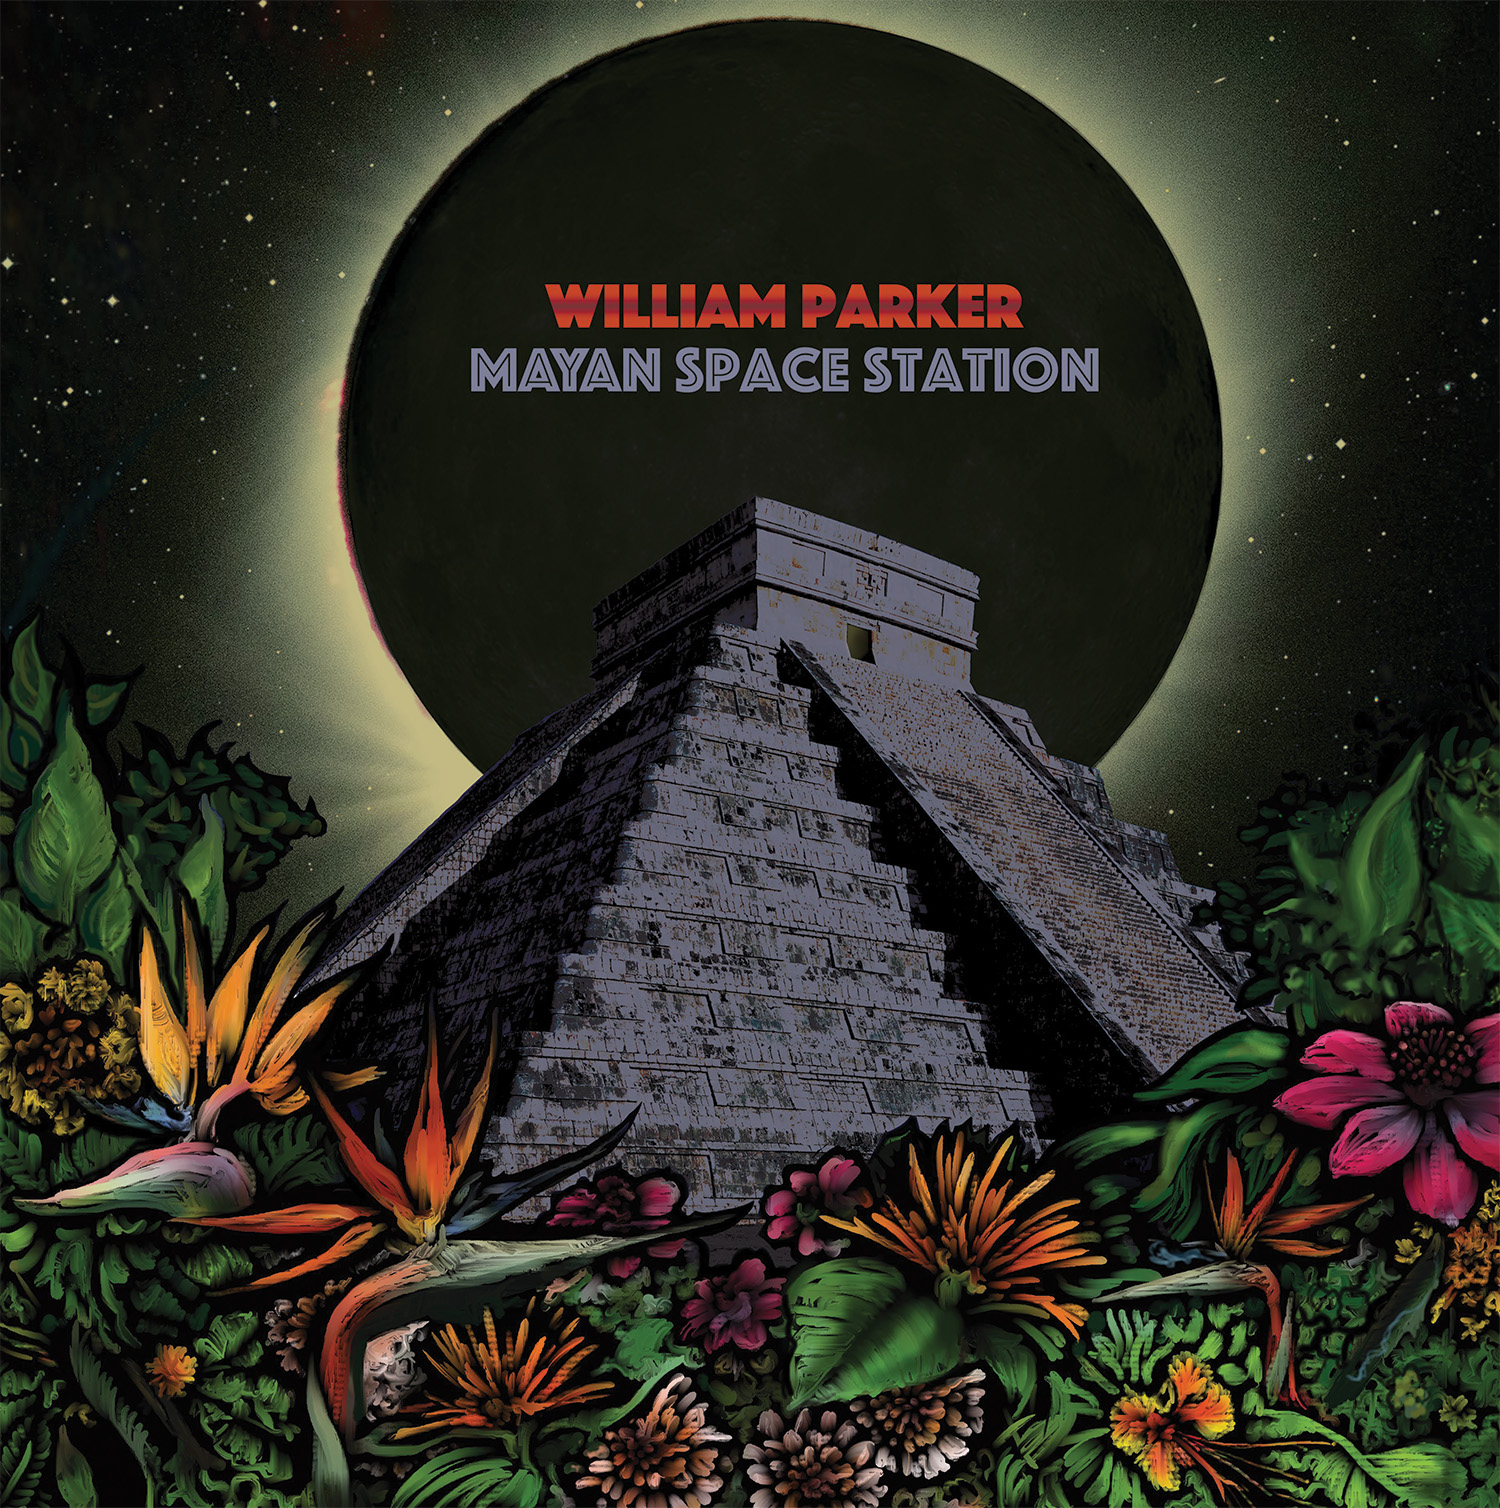 front cover of LP Painters Winter by William Parker